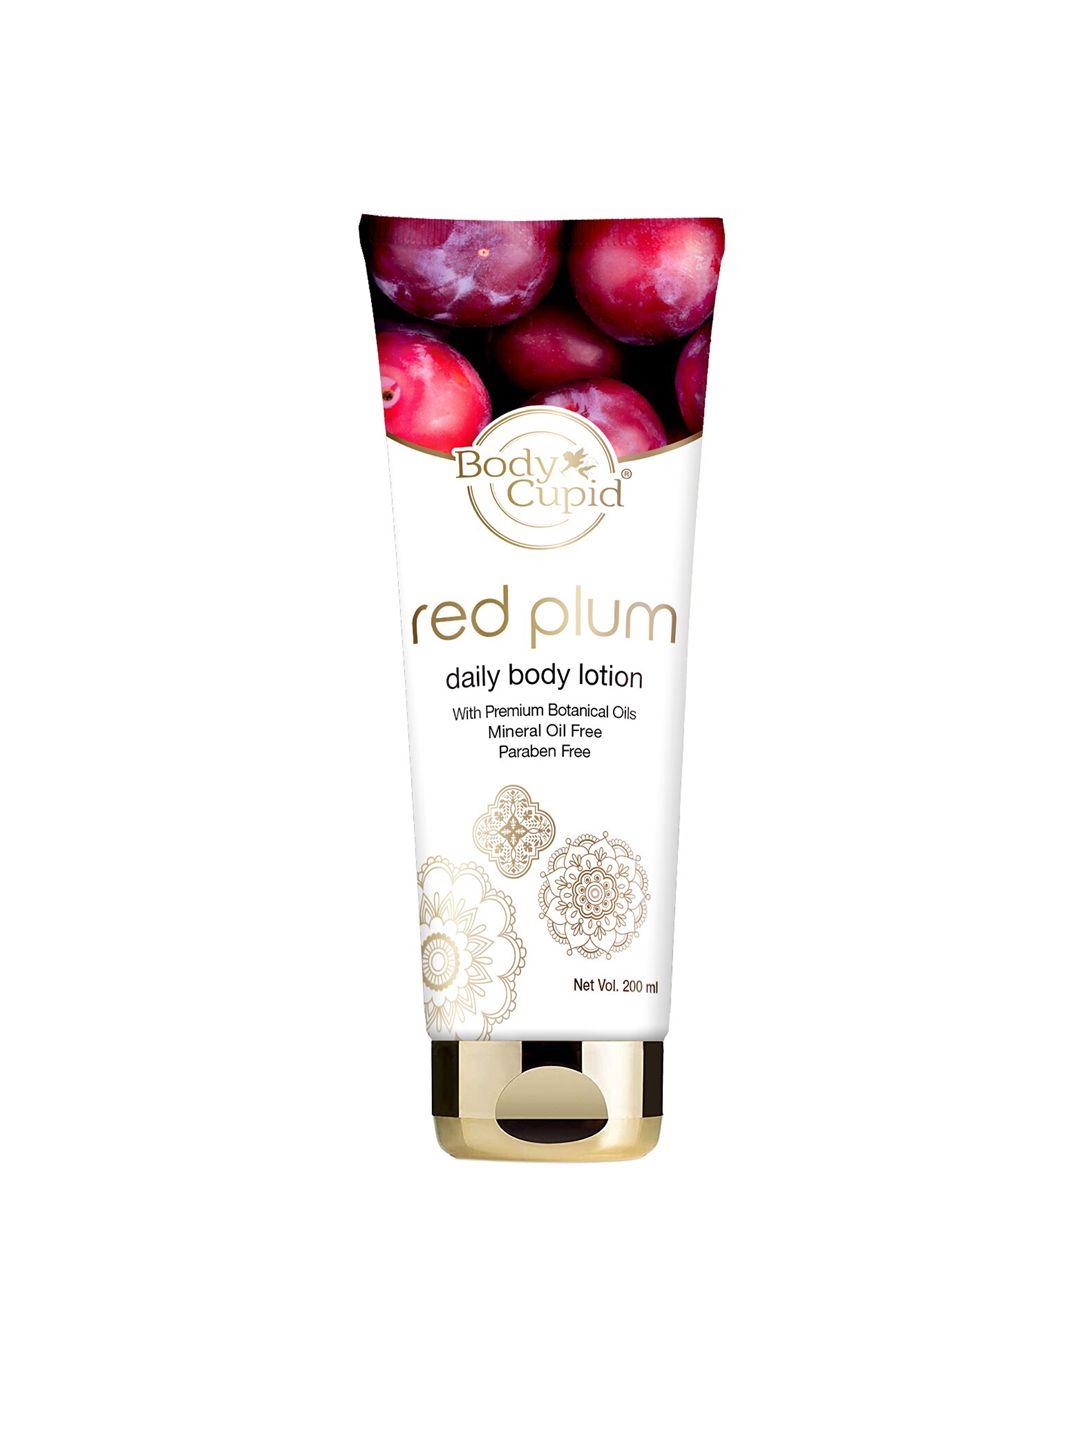 body cupid red plum daily body lotion with premium botanical oils - 200 ml